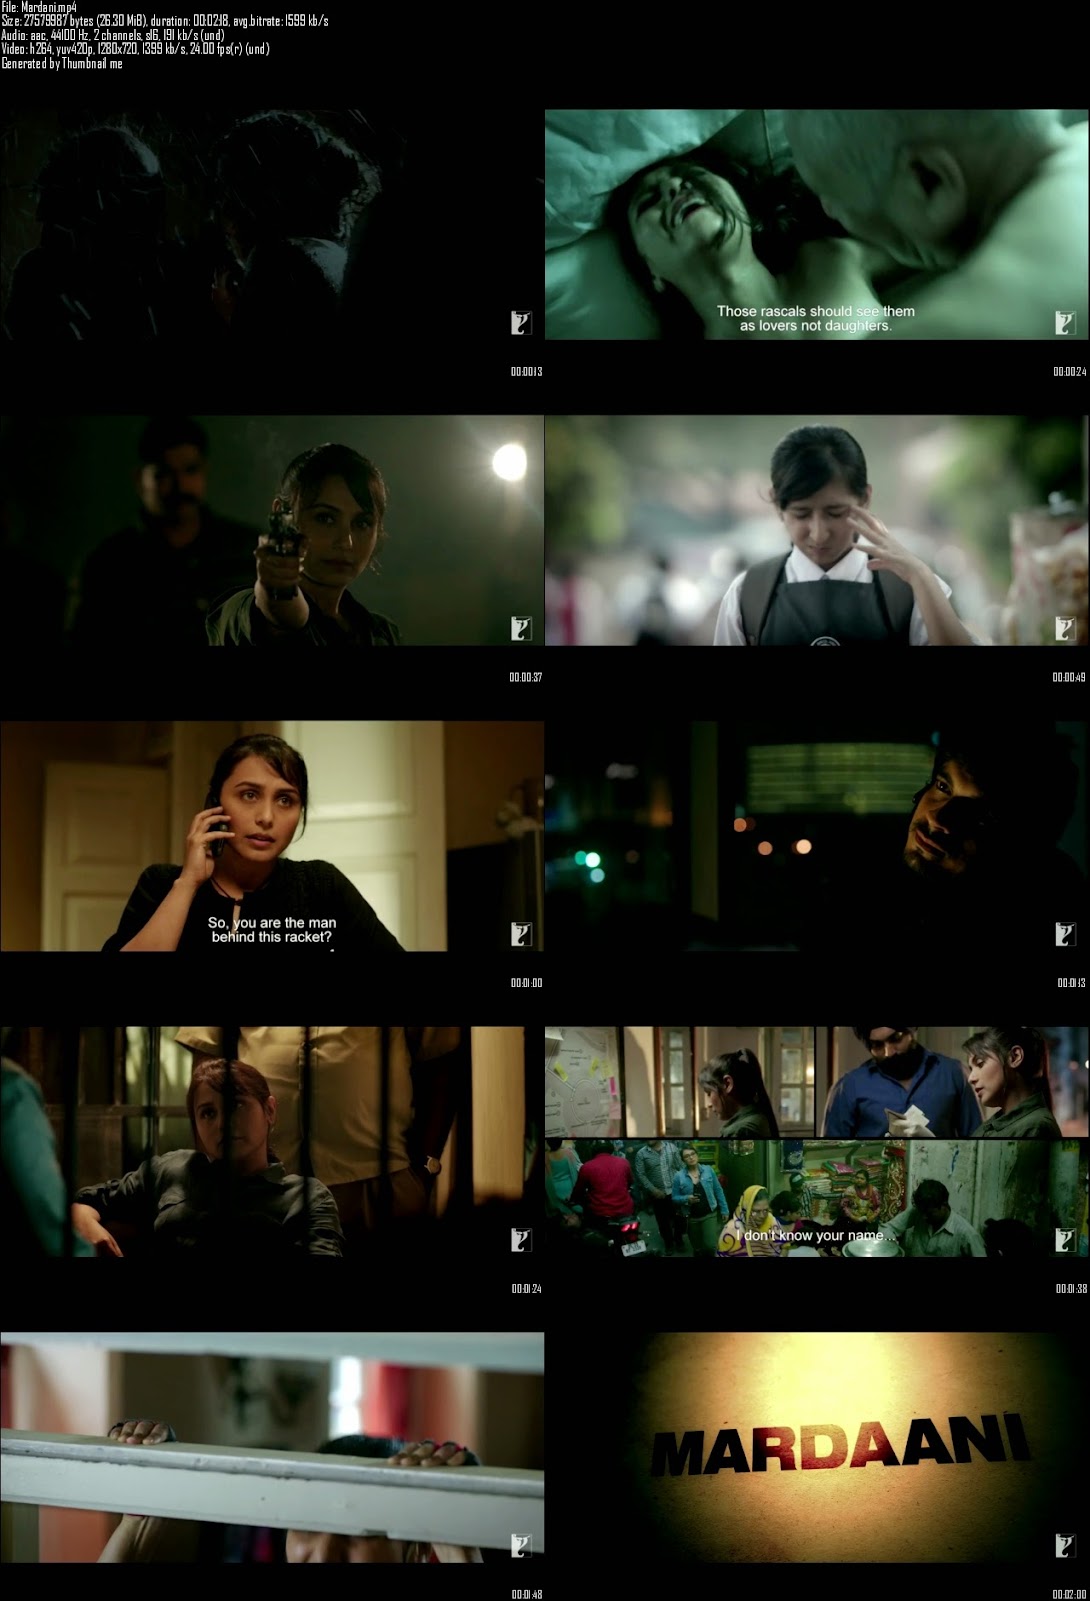 Mediafire Resumable Download Link For Teaser Promo Of Mardaani (2014)